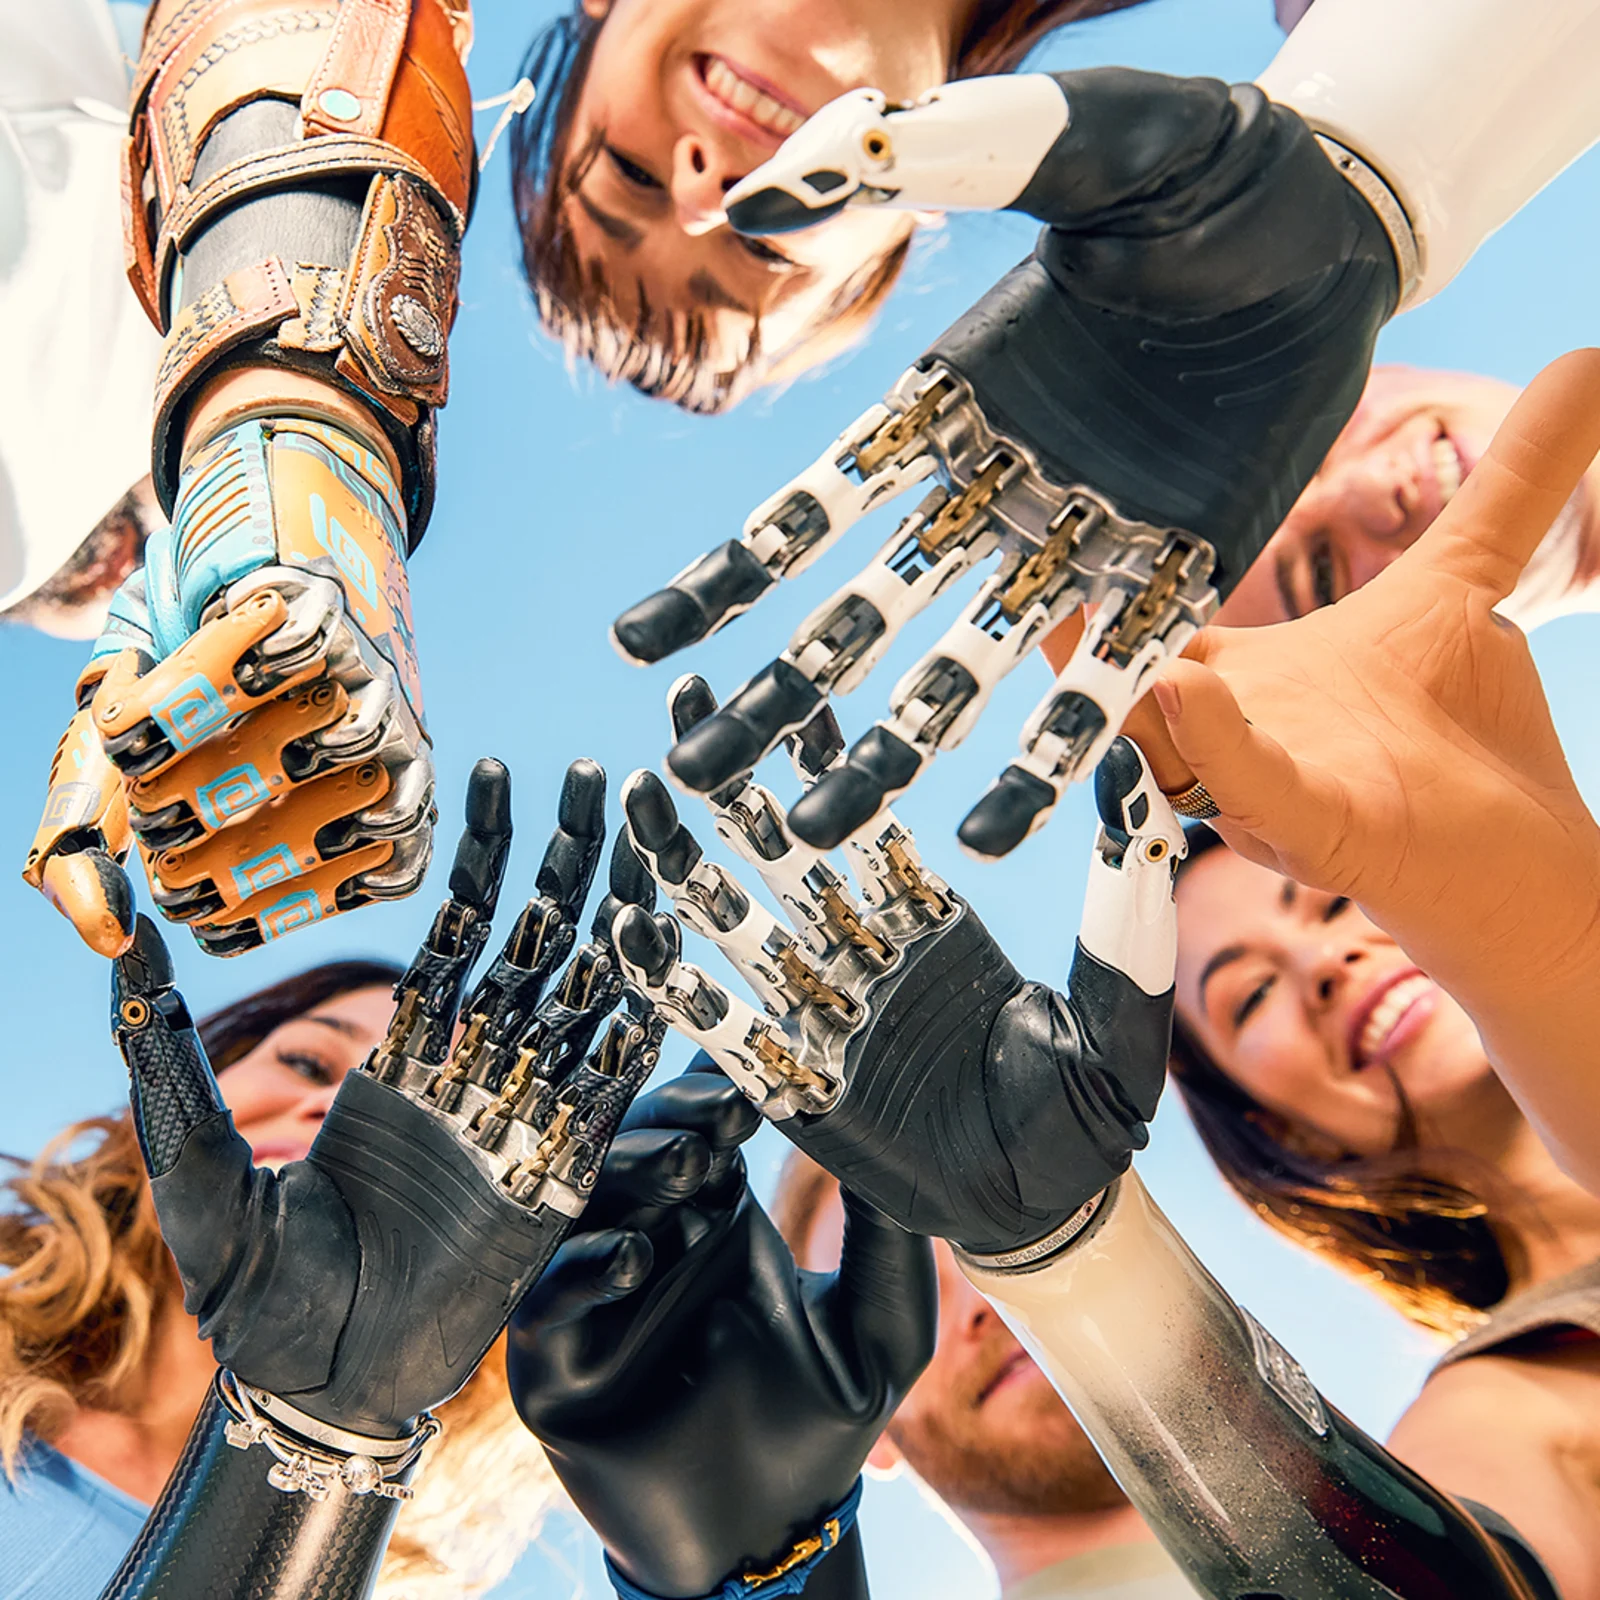 Various Ottobock prosthetic hand users huddle in a circle and stretch their hands in the center